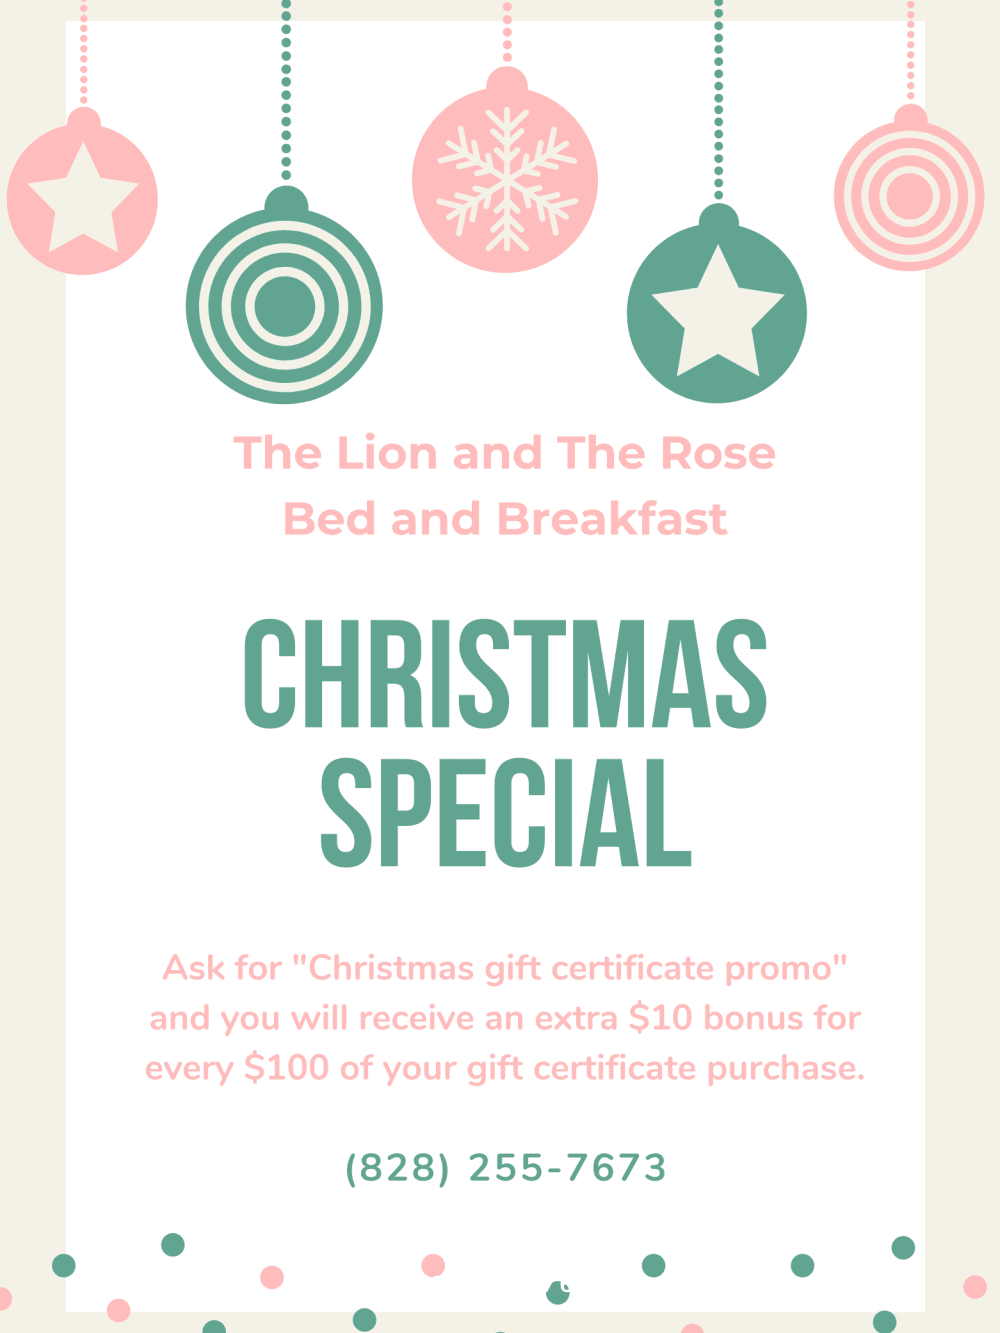 Celebrate the holidays with a gift certificate from our Asheville Bed and Breakfast